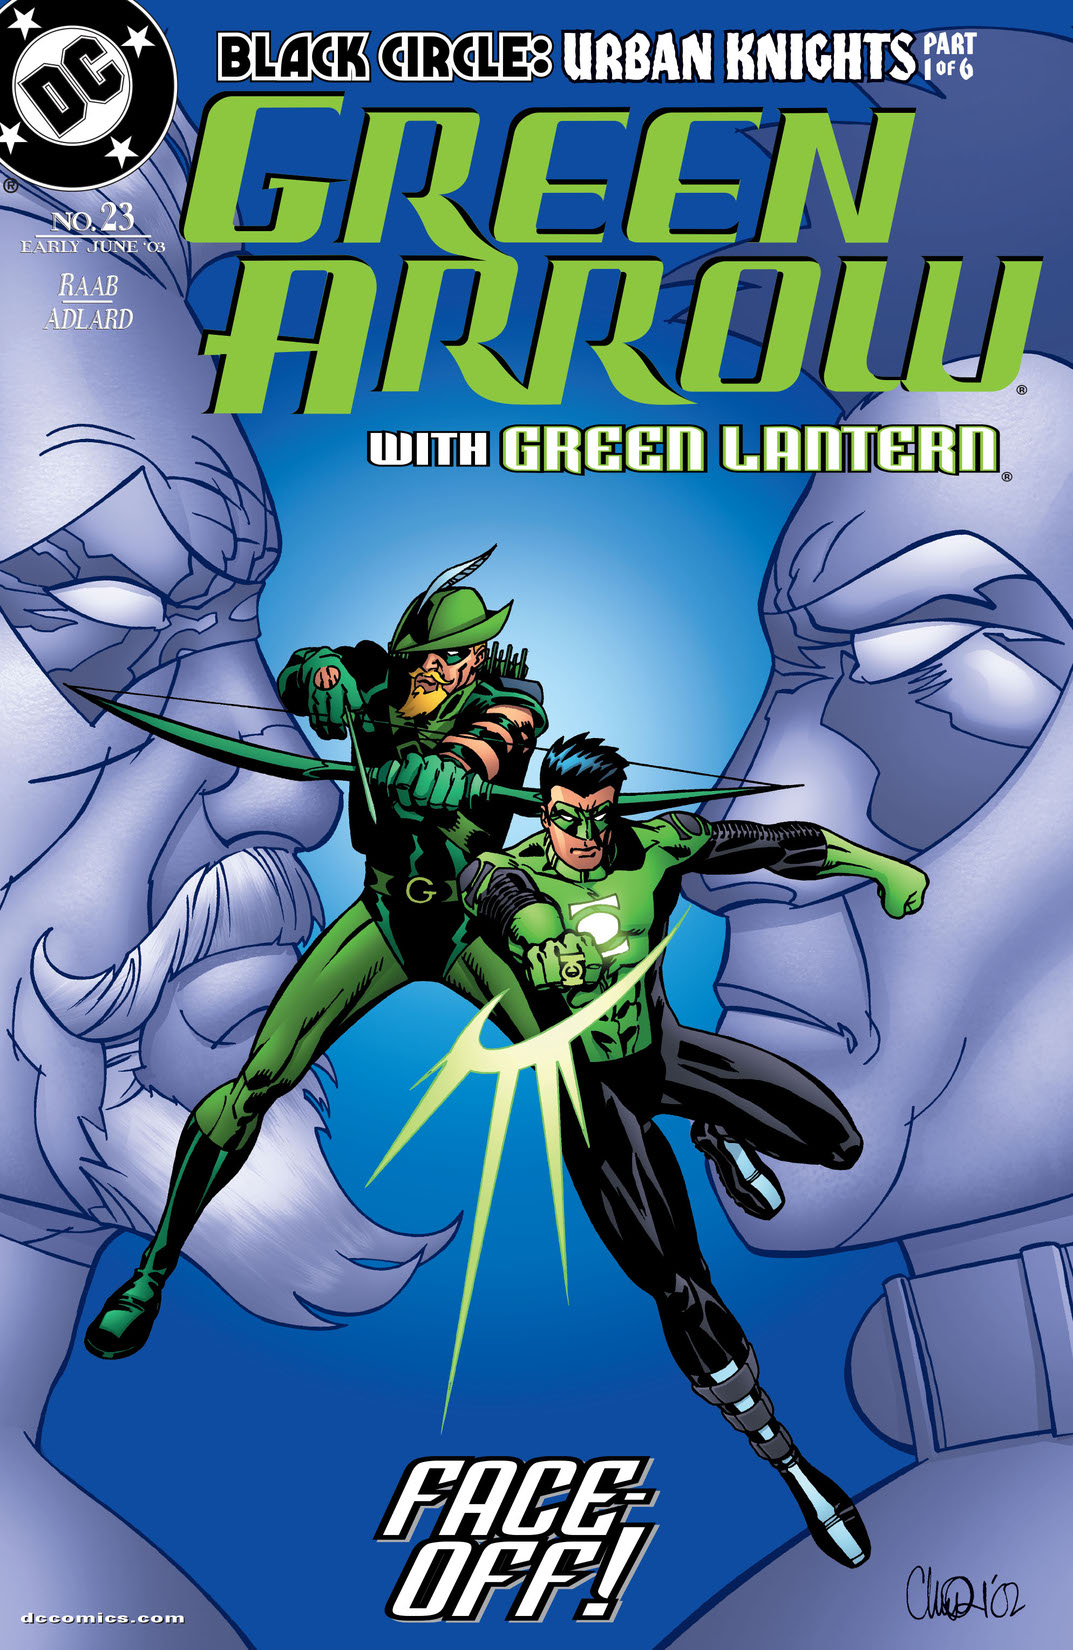 Green Arrow (2001-) #23 preview images